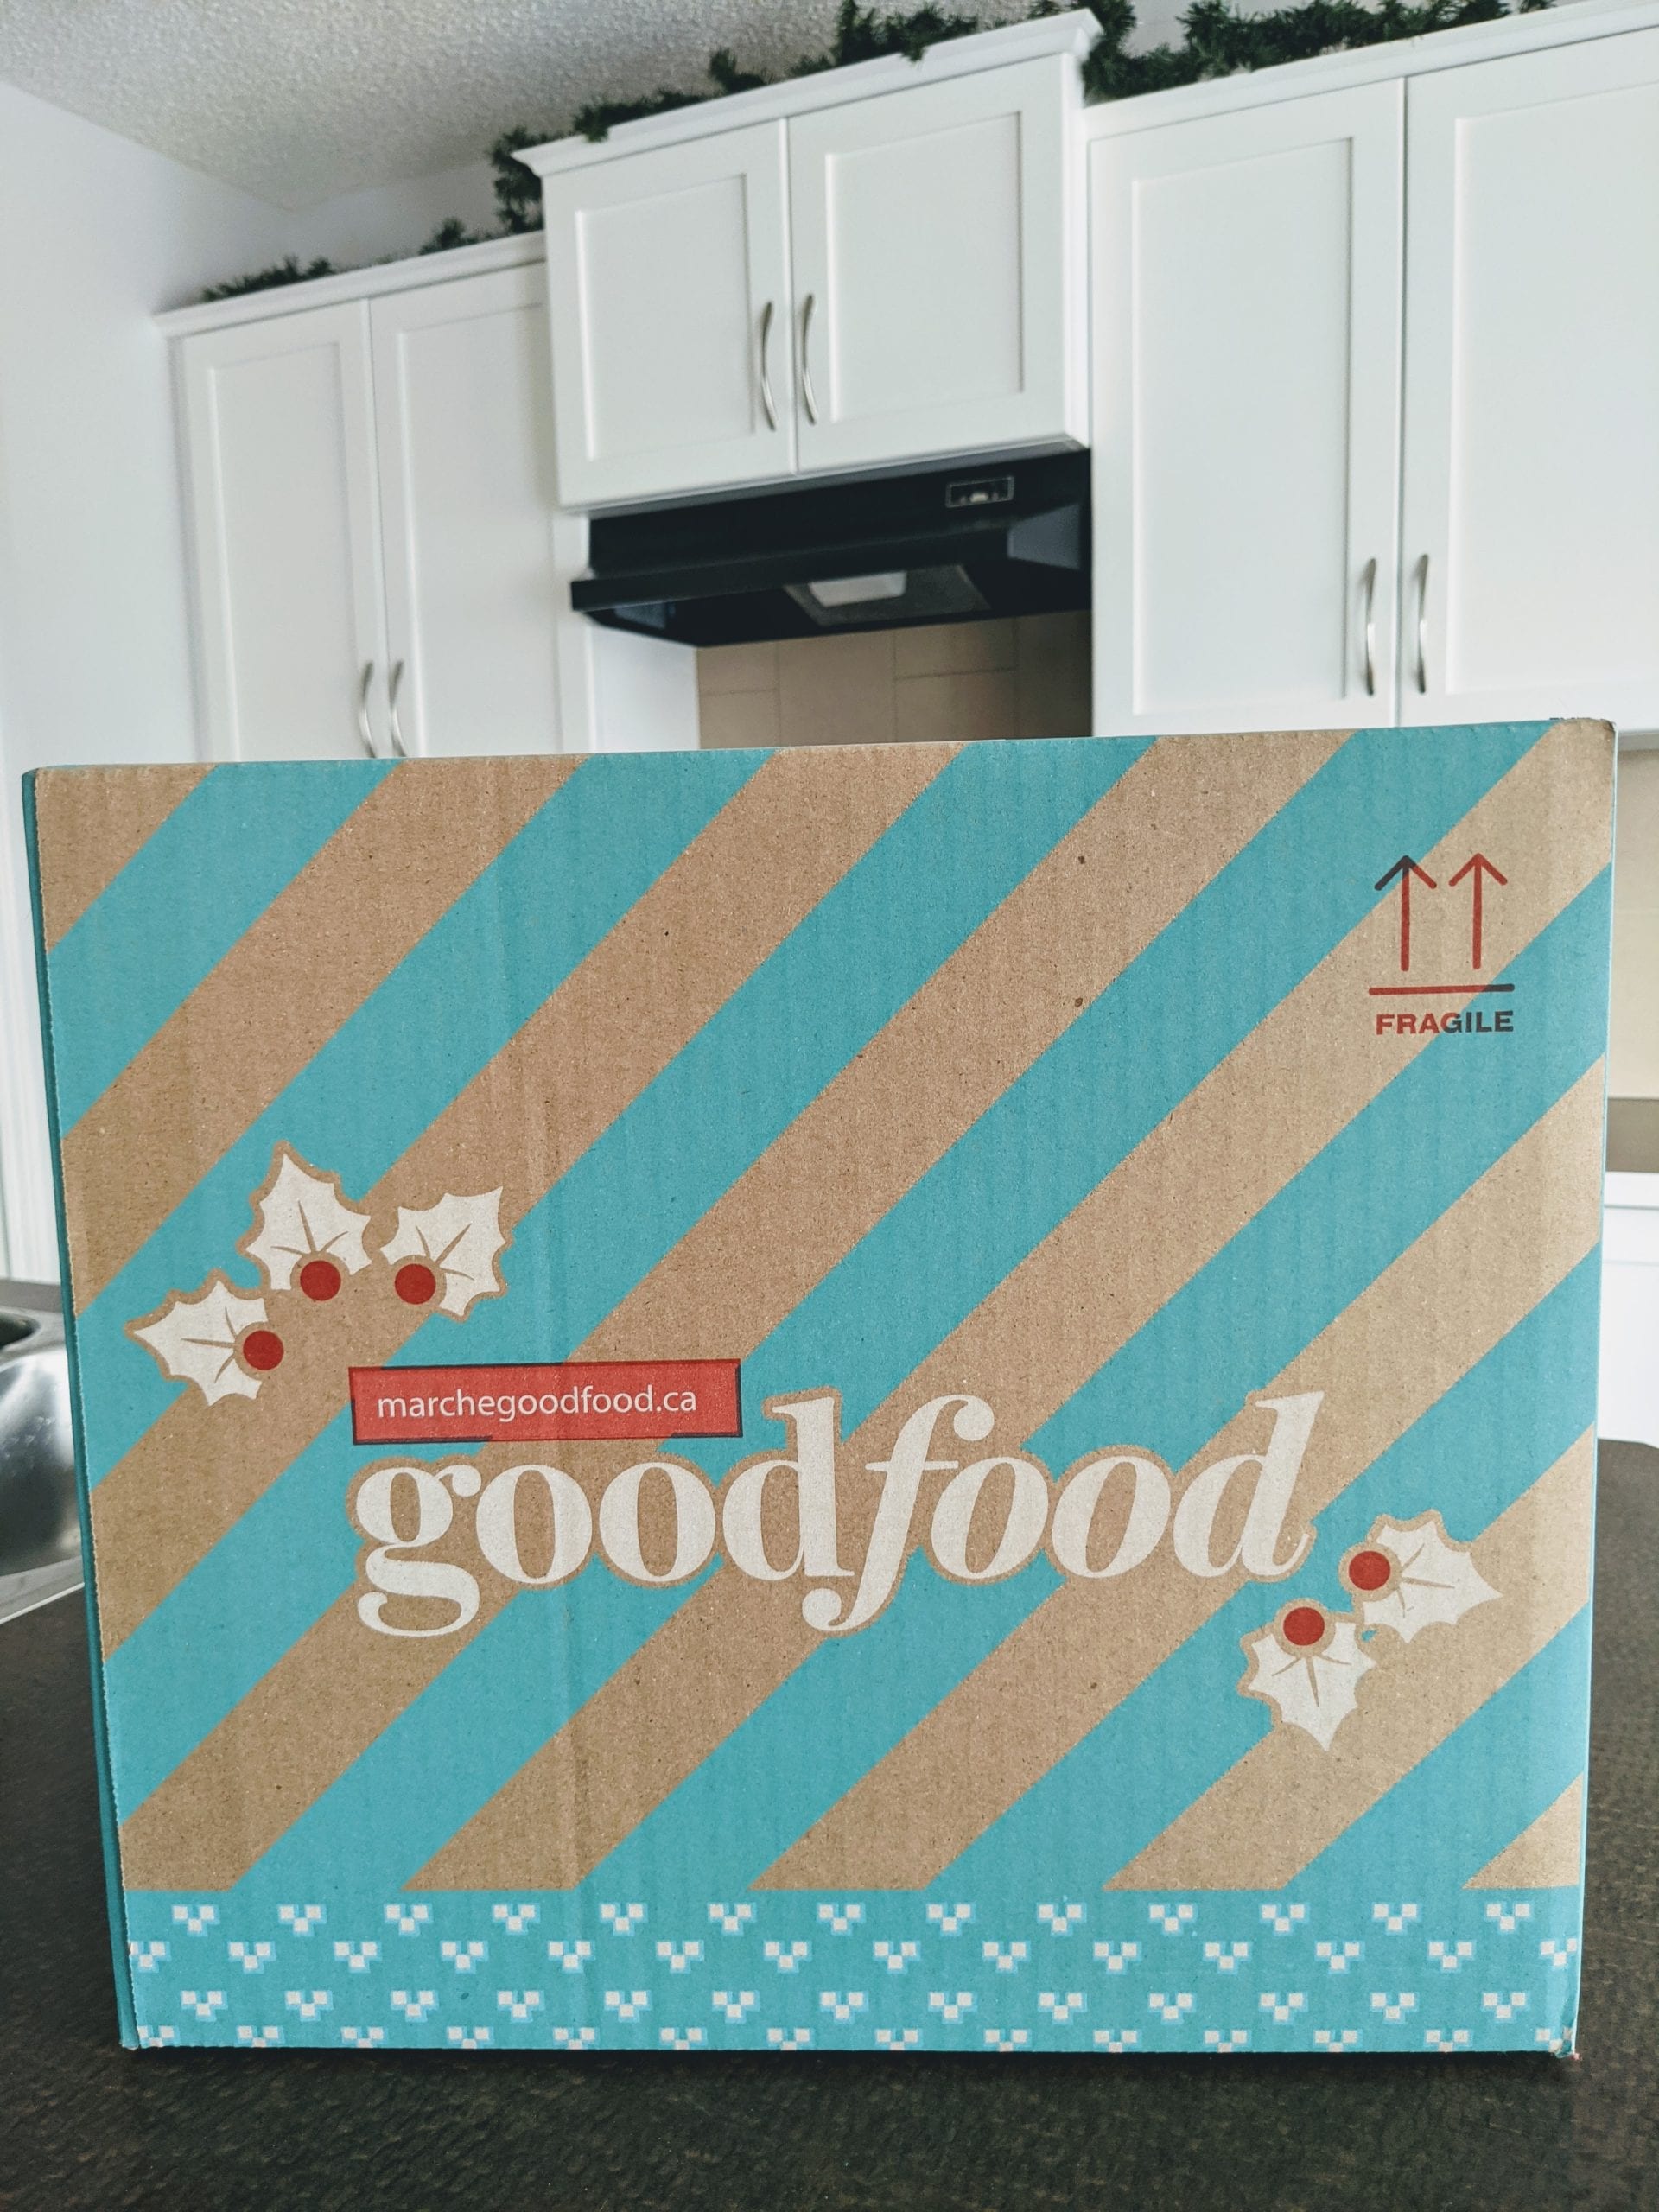 Goodfood Meal Kit Review & Coupon!